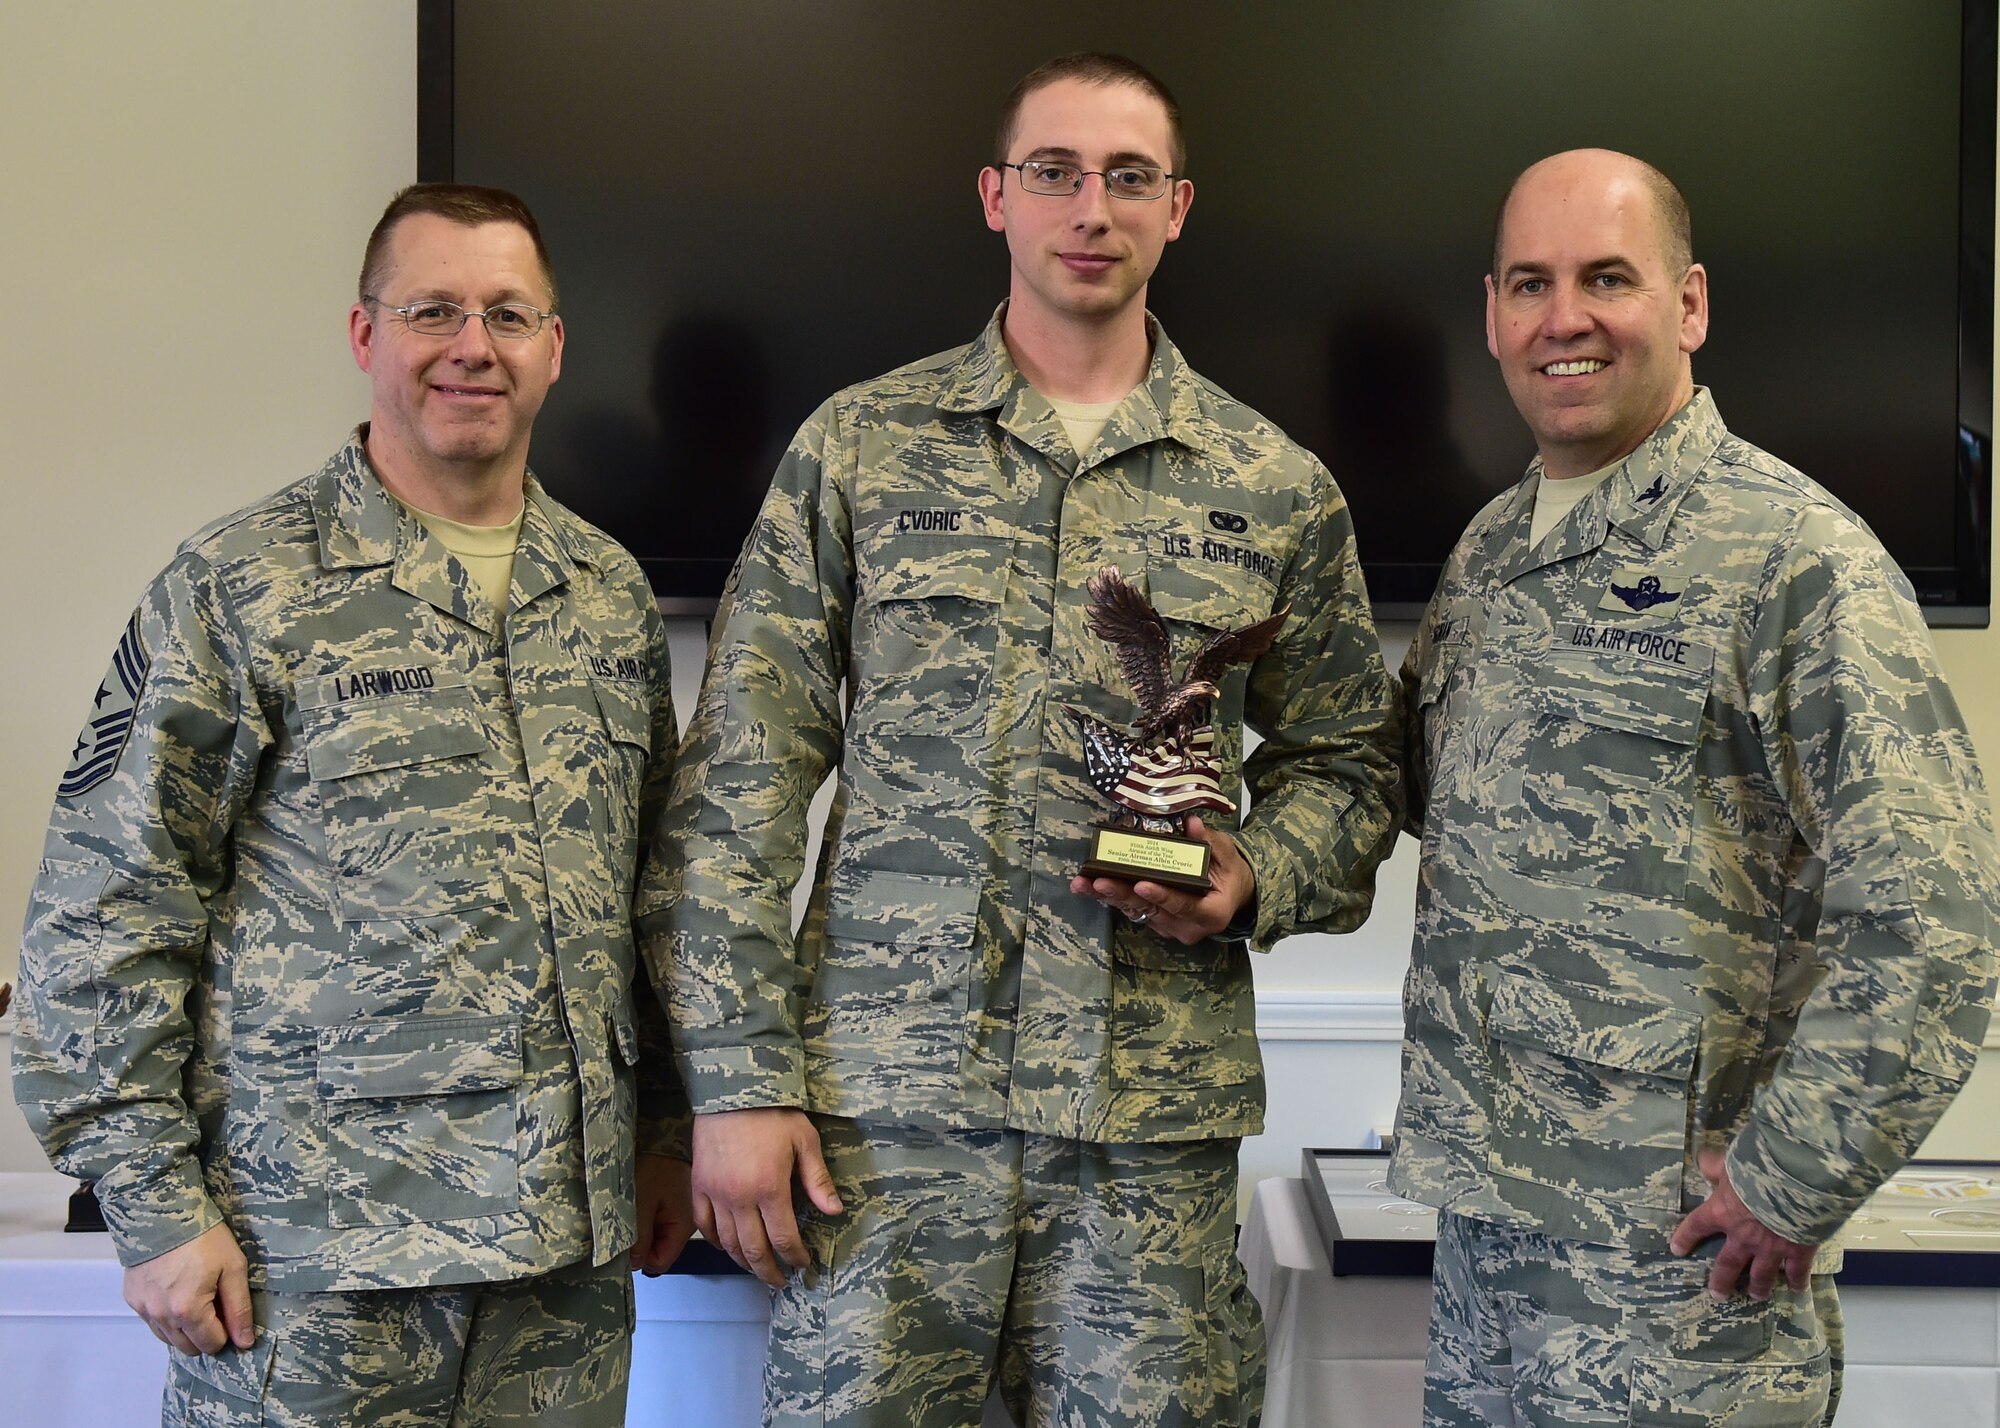 910th Airlift Wing 2014 Airman of the Year, Senior Airman Albin Cvoric, poses with 910th Airlift Wing Command Chief Master Sgt. Steven Larwood and 910th Airlift Wing Commander Col. James Dignan, after receiving his award at a ceremony April 12. Cvoric is a 910th Security Forces fireteam member here. (U.S. Air Force photo/Senior Airman Rachel Kocin)